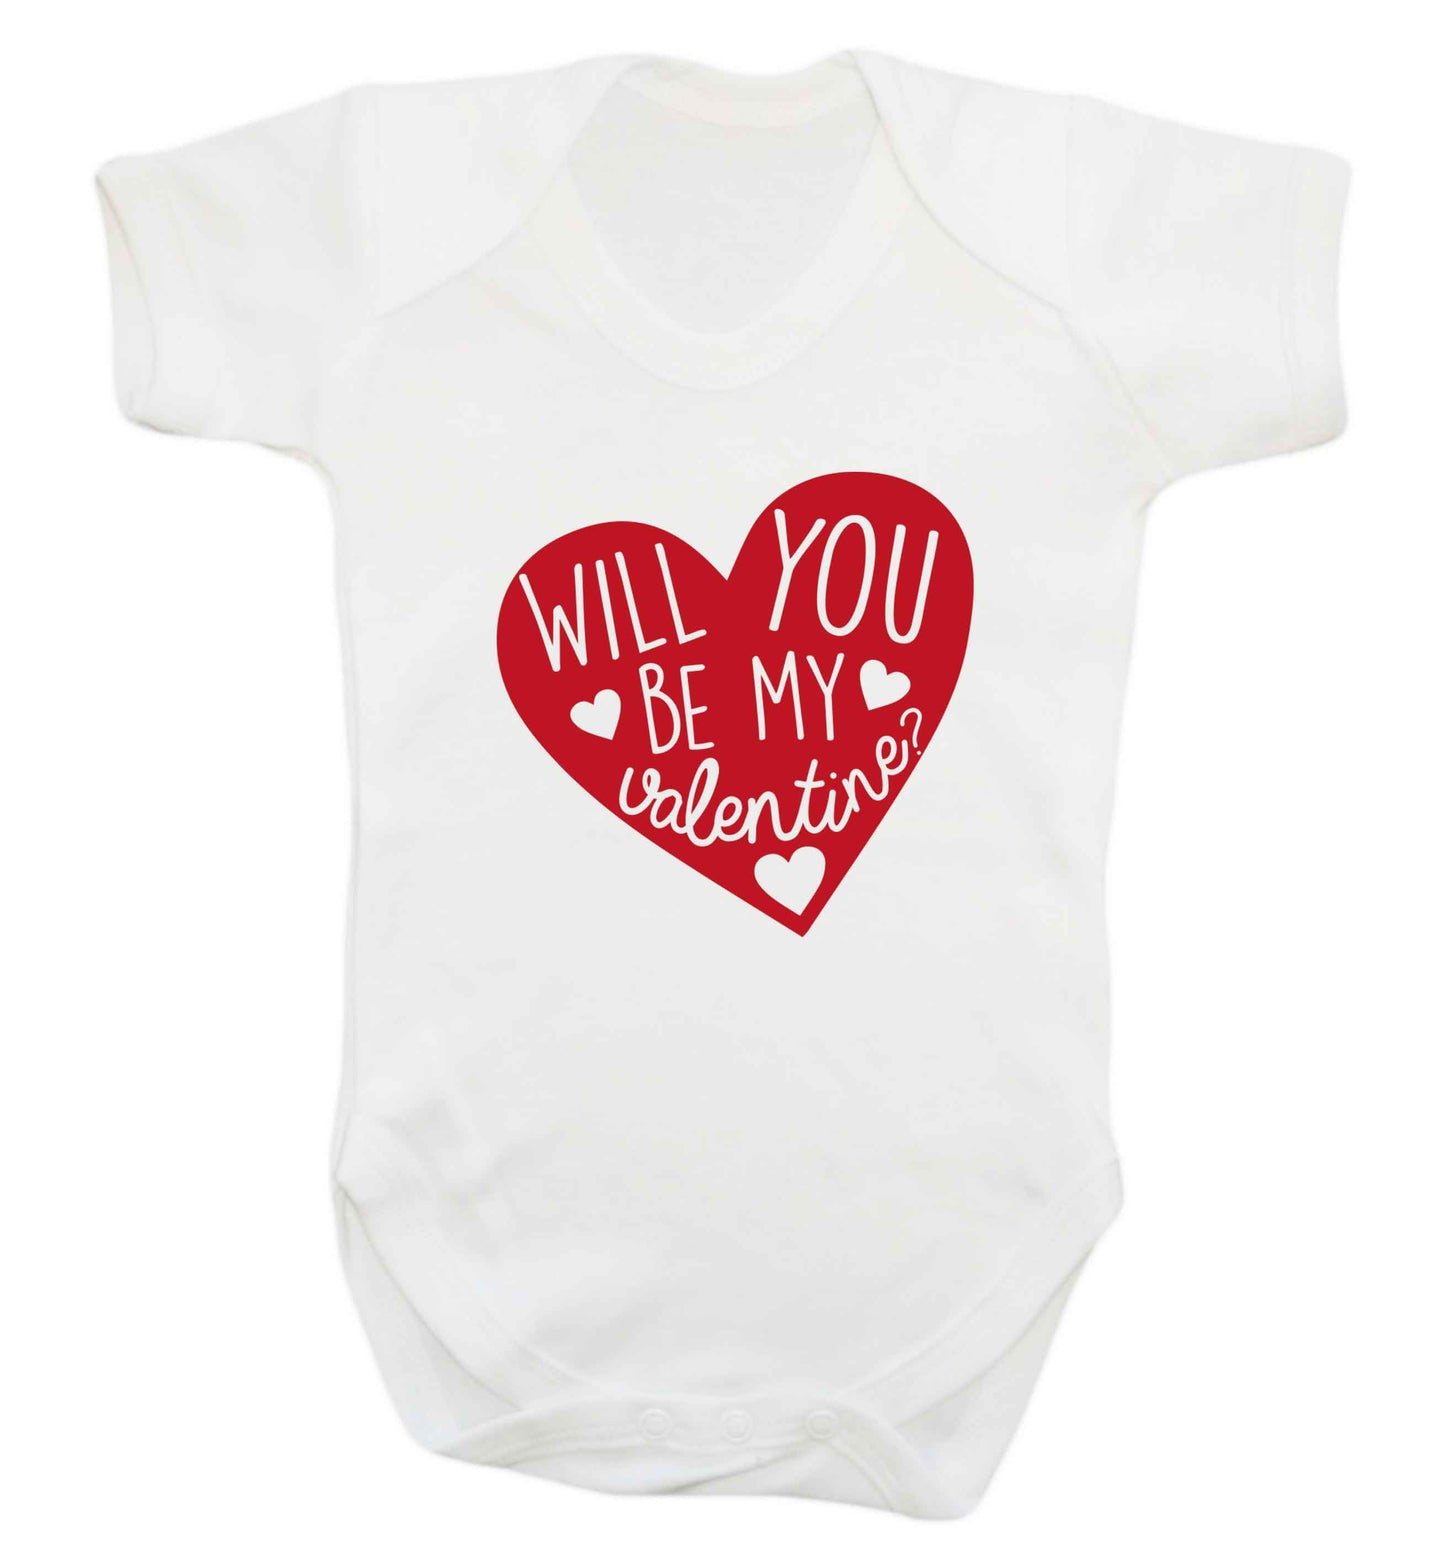 Will you be my valentine? baby vest white 18-24 months